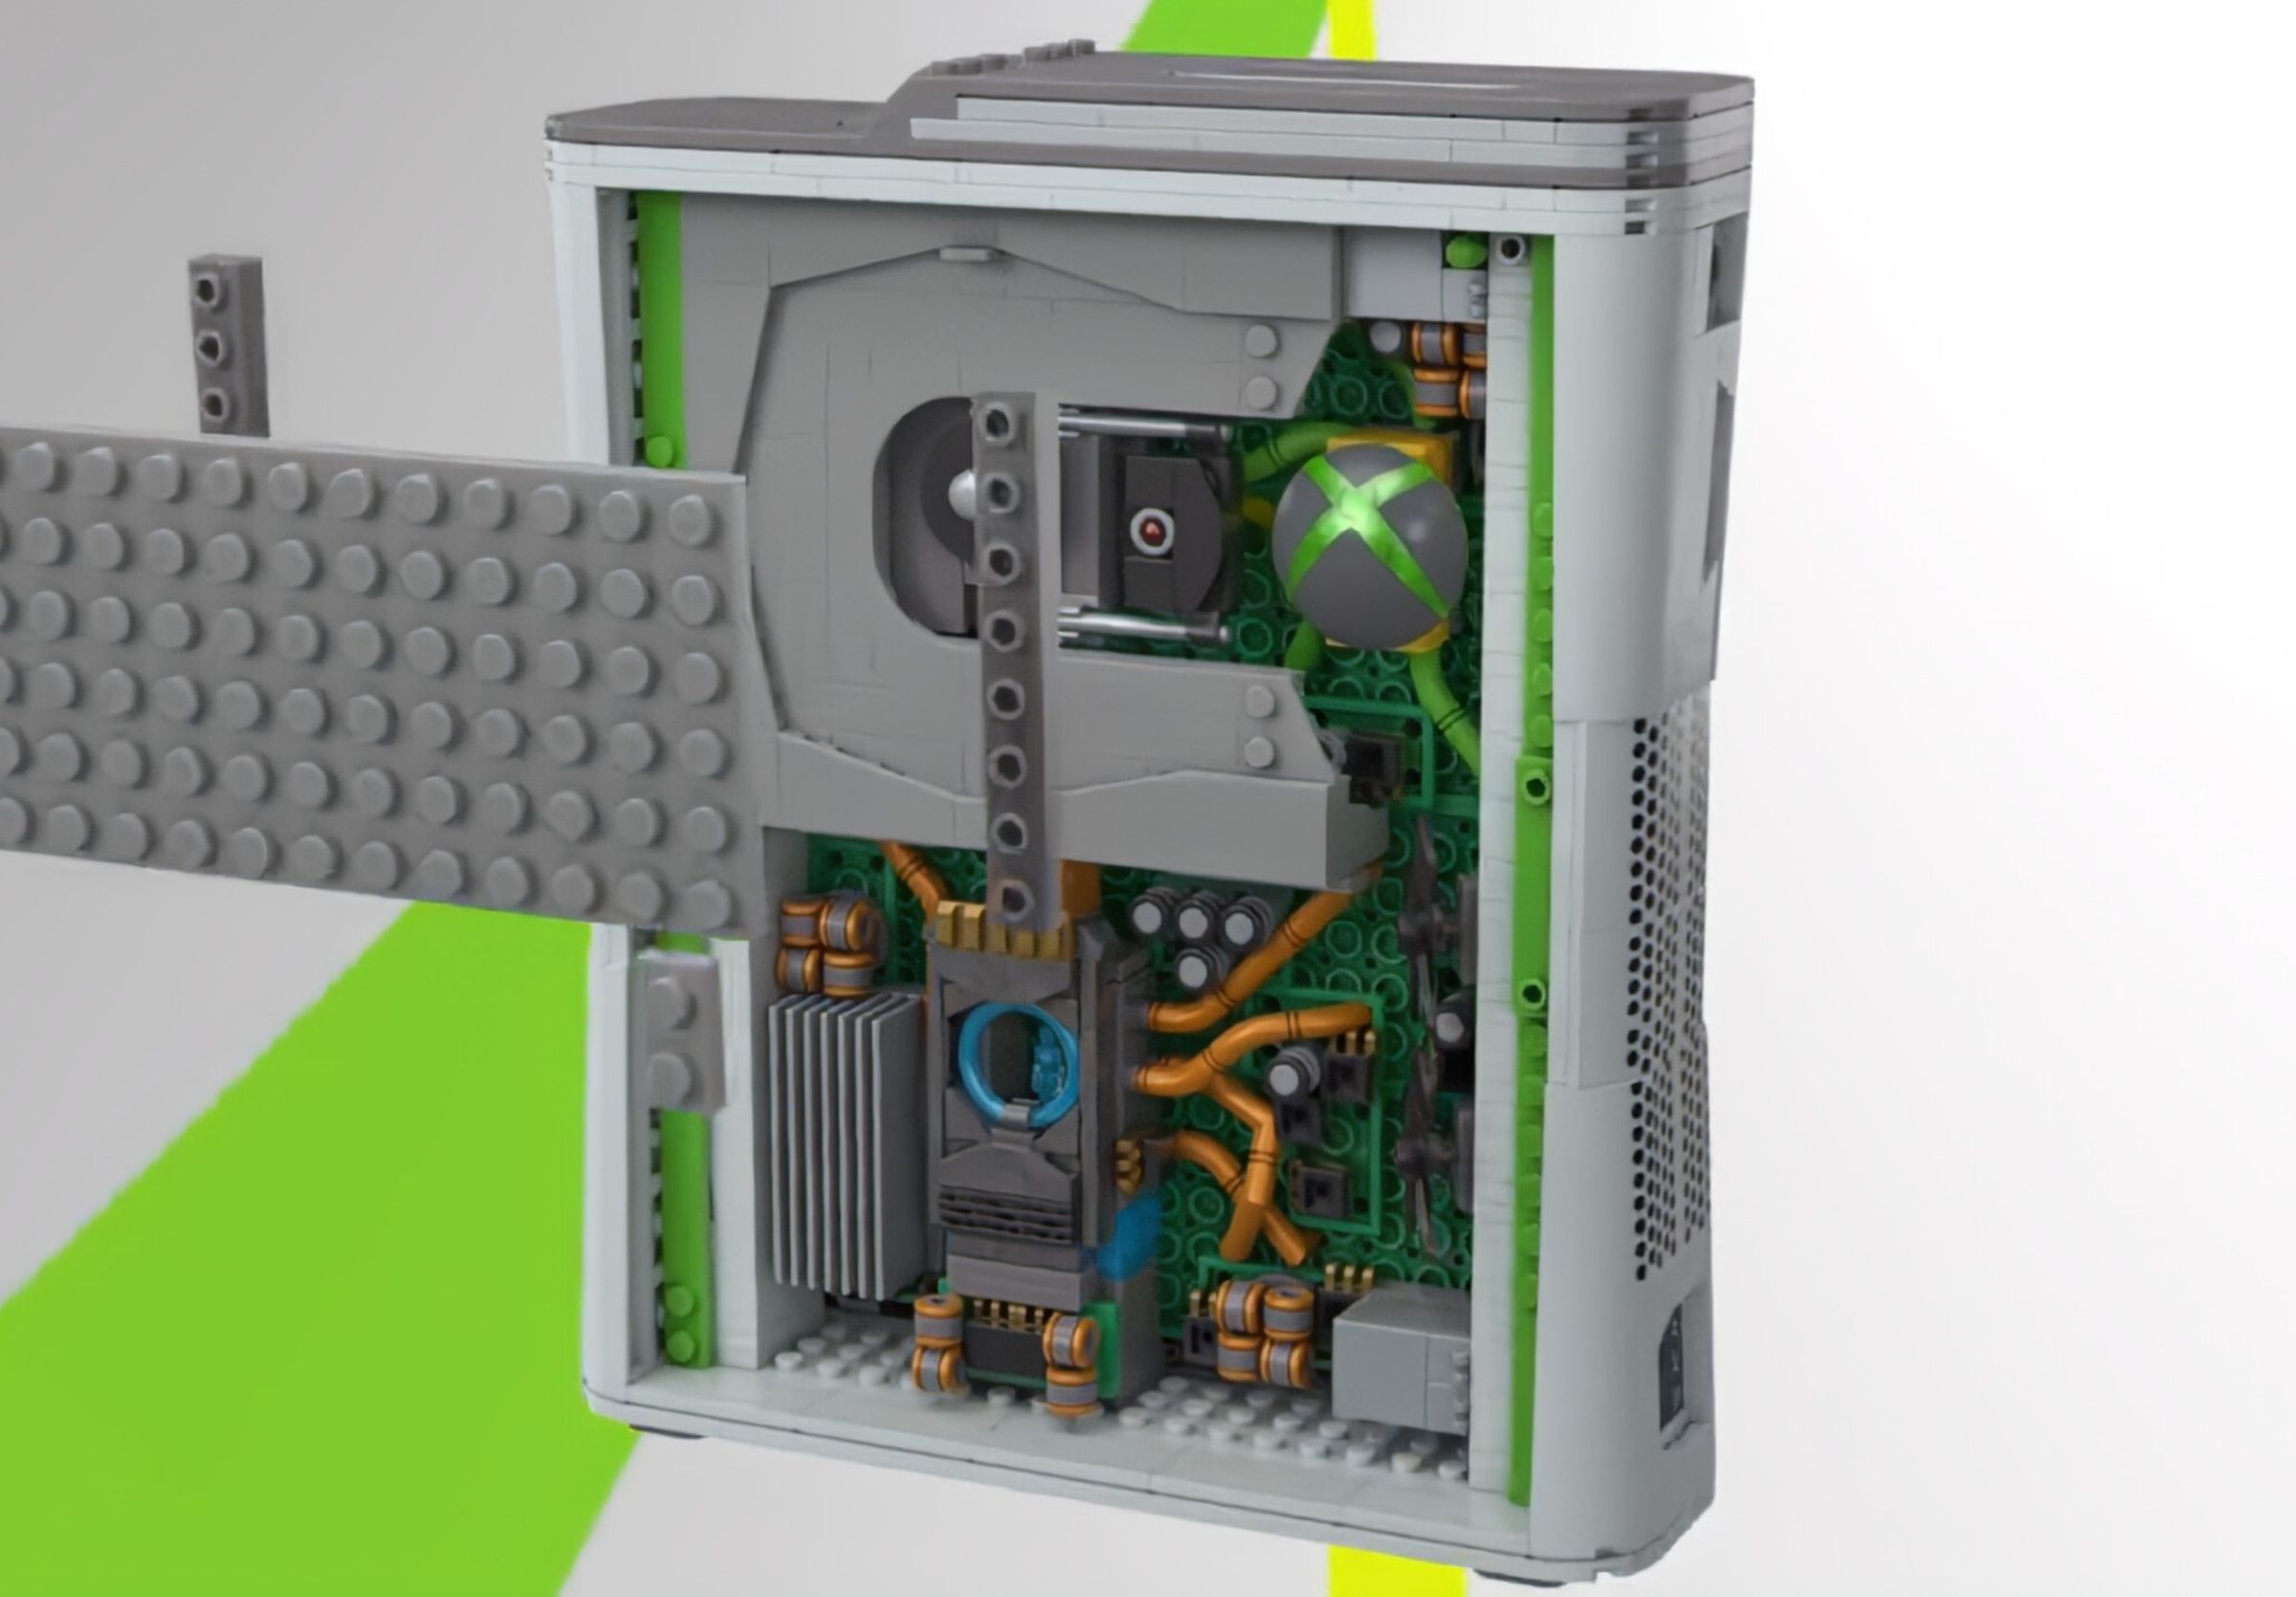 Image of the Mega Xbox 360 replica’s internal components rendered in building blocks.